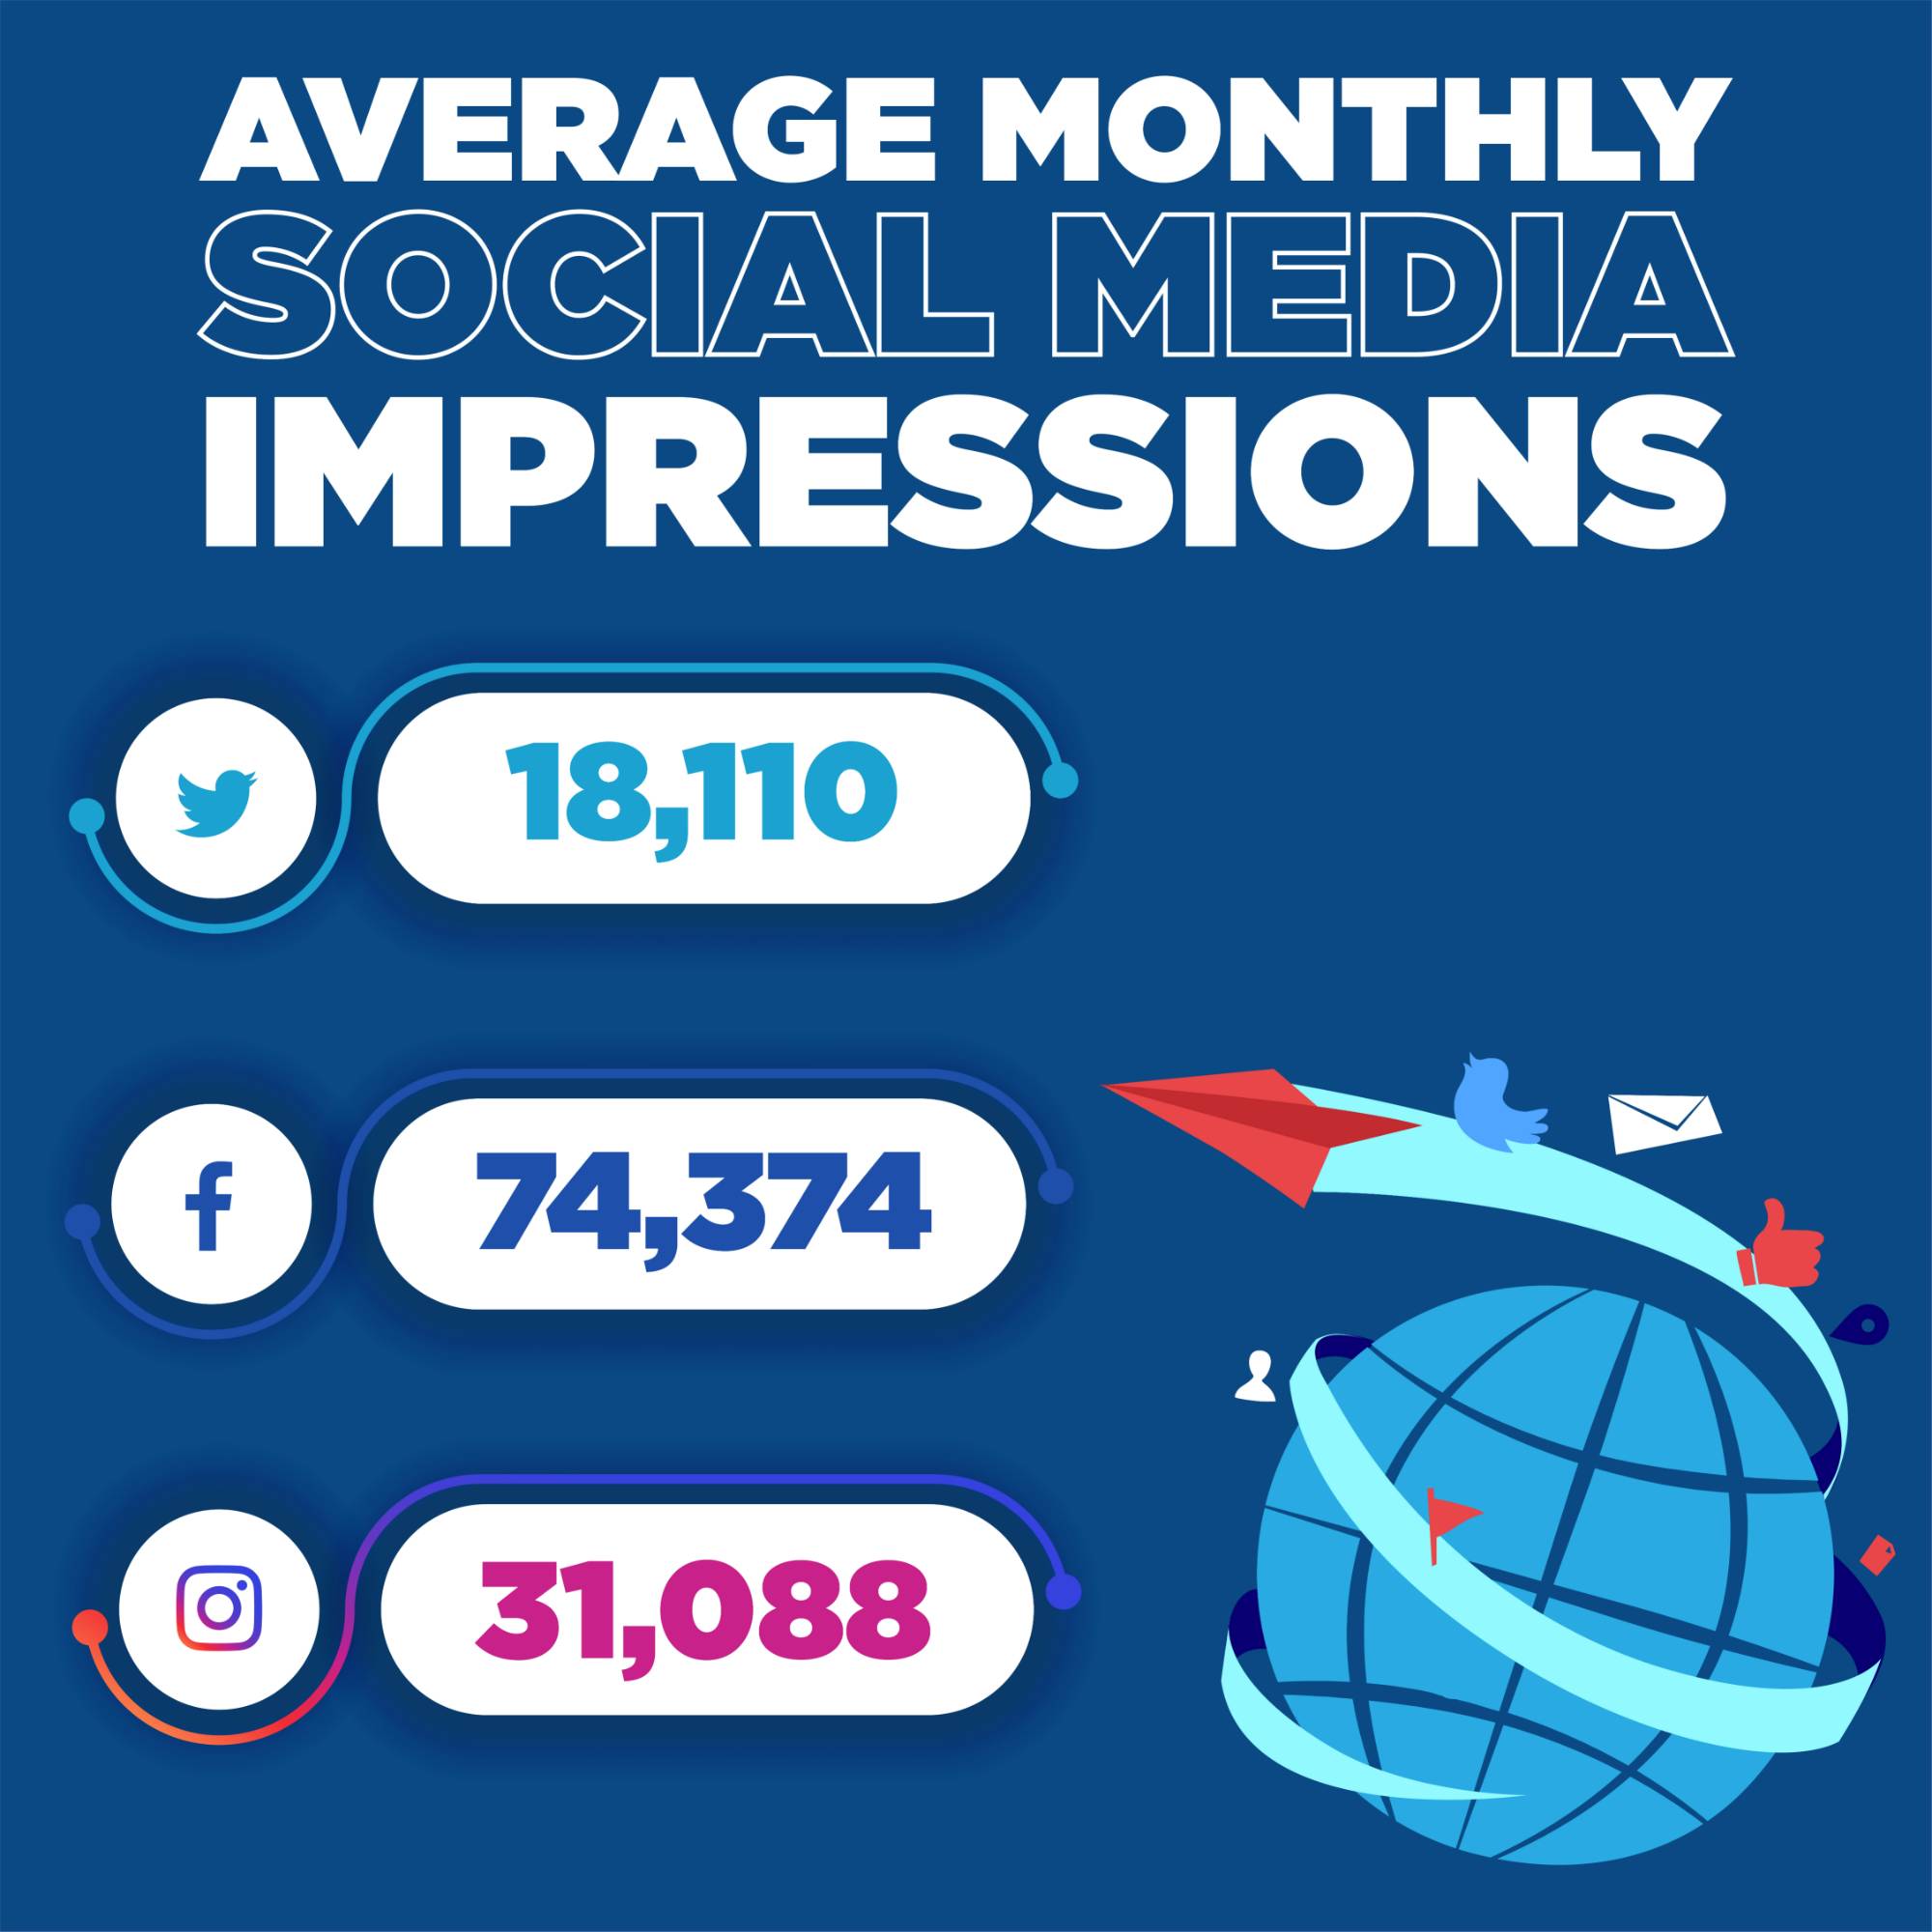 Average monthly social media impressions: Twitter (18,110 impressions), Facebook (74,374 impressions), Instagram (31,088 impressions).